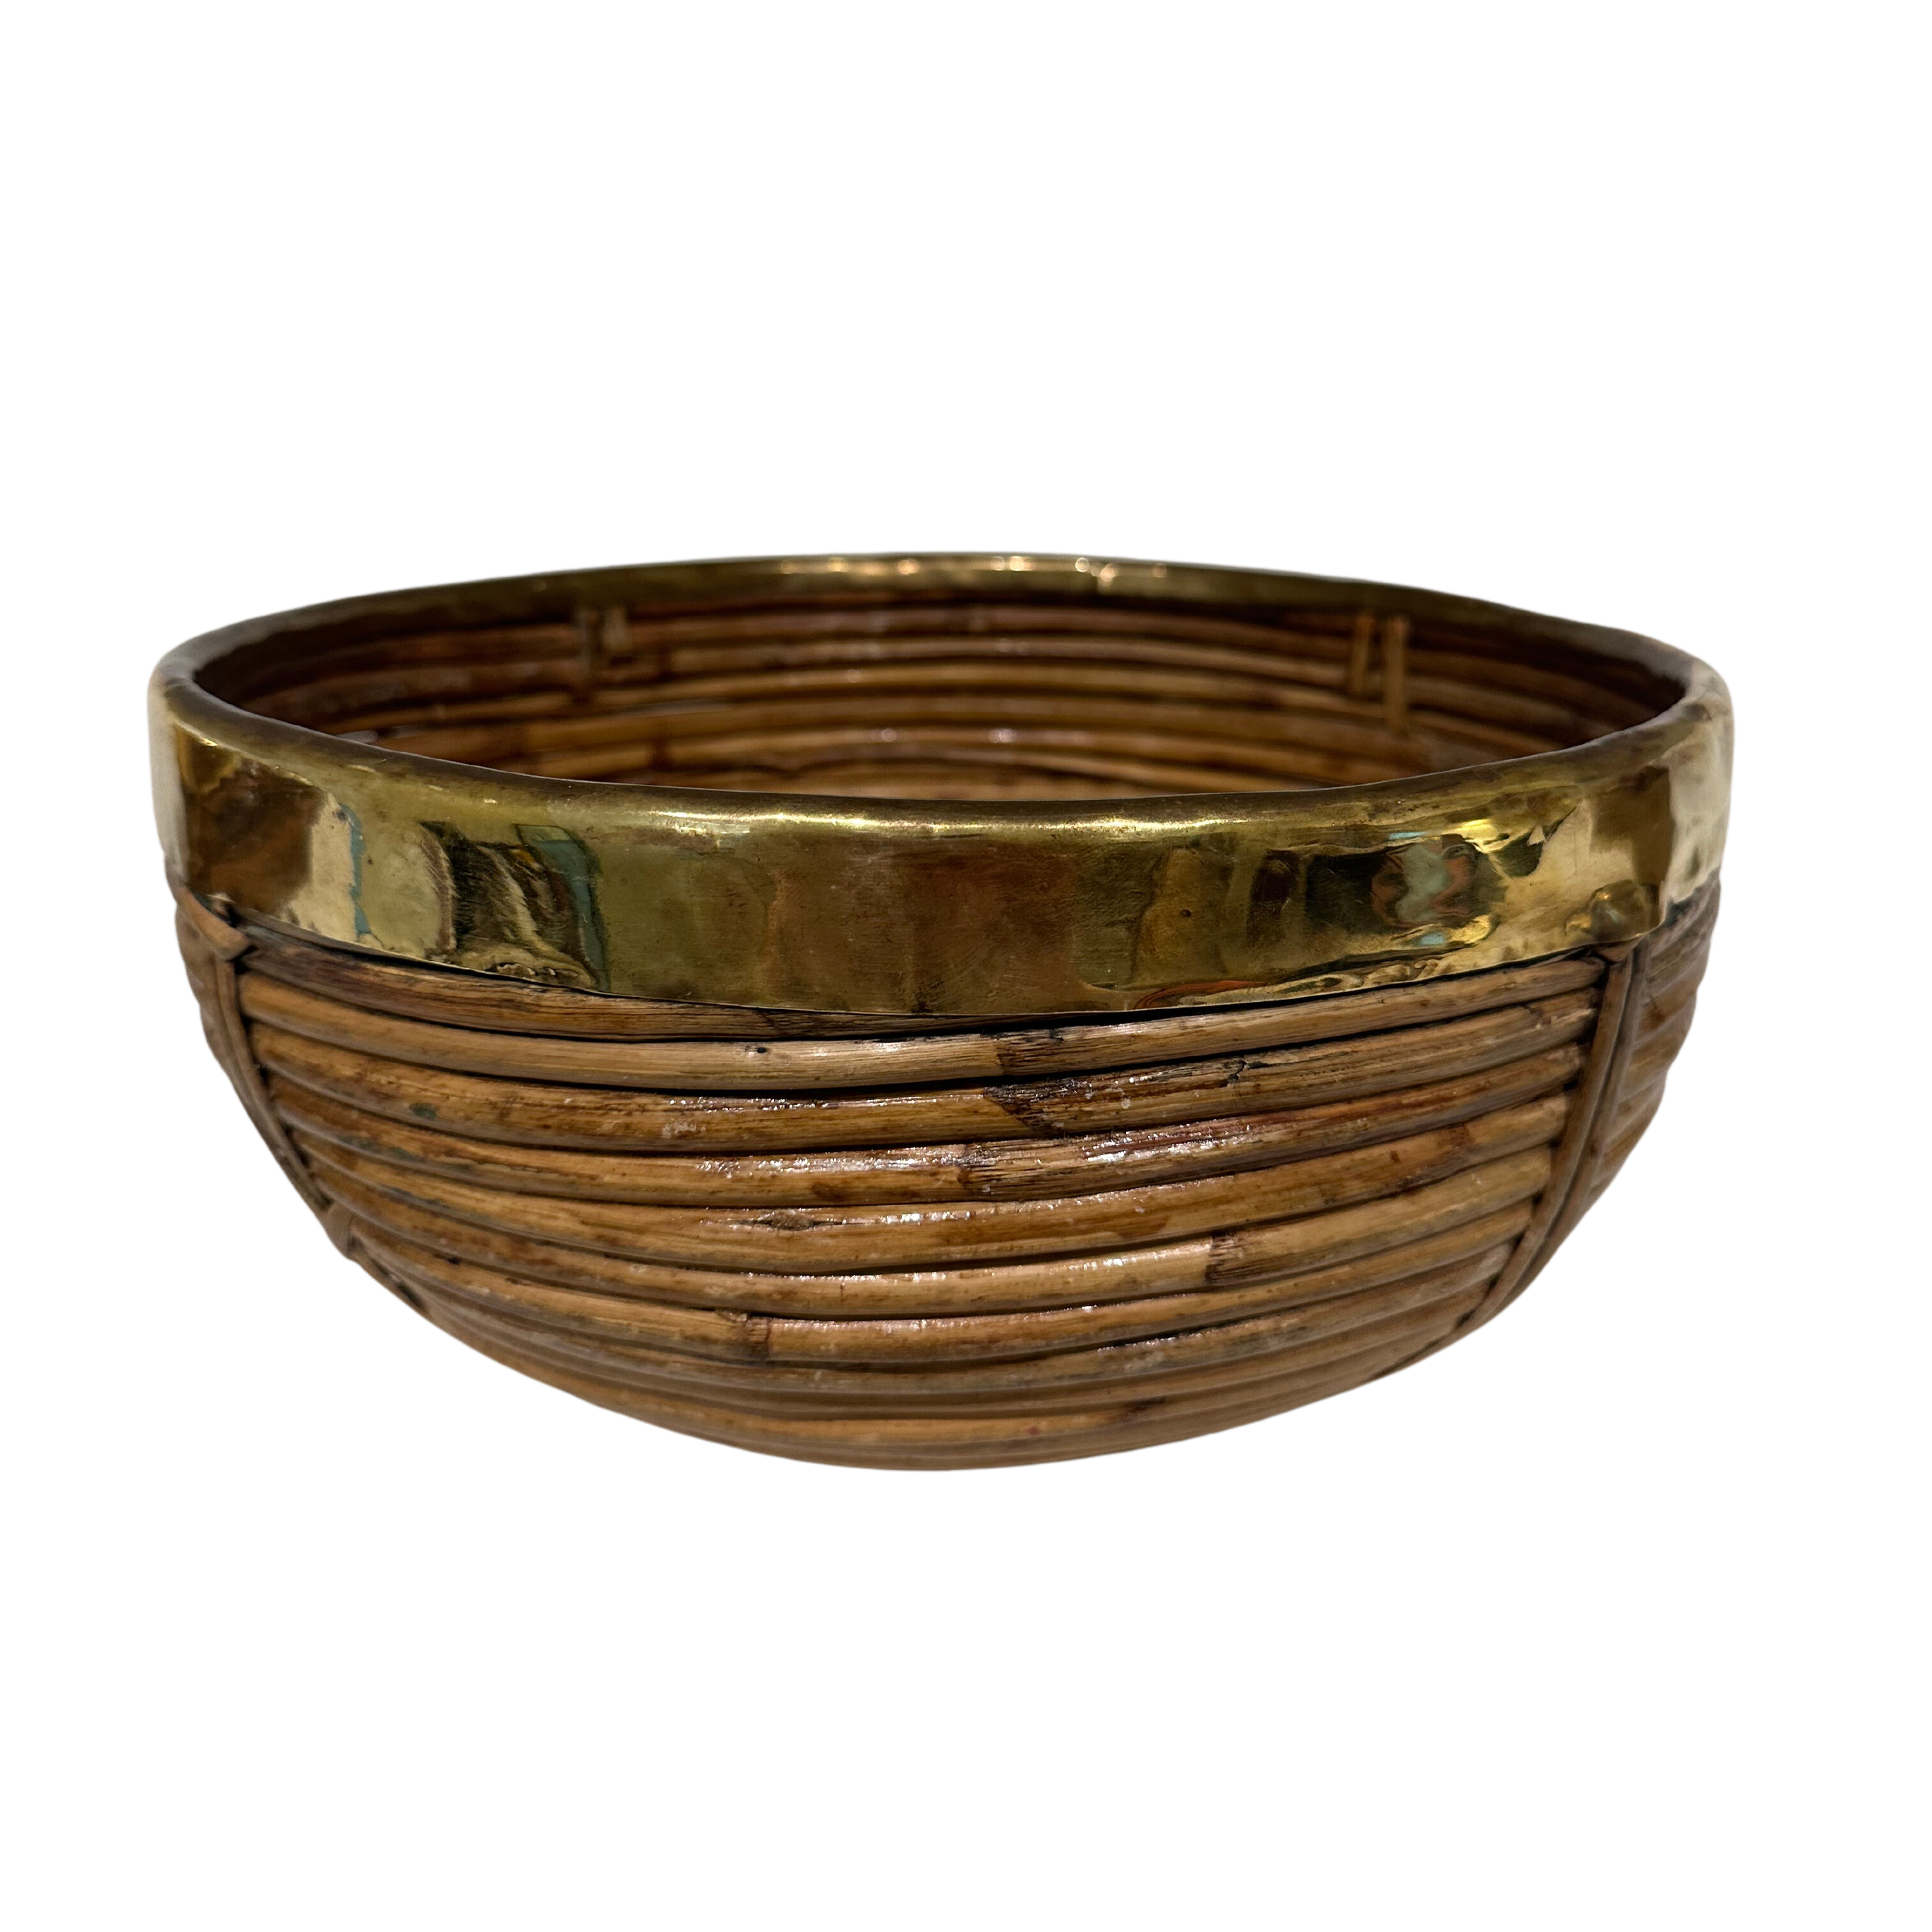 Vintage Italian Rattan Basket Bowl with Brass Trim in the Style of Gabriella Crespi, Large